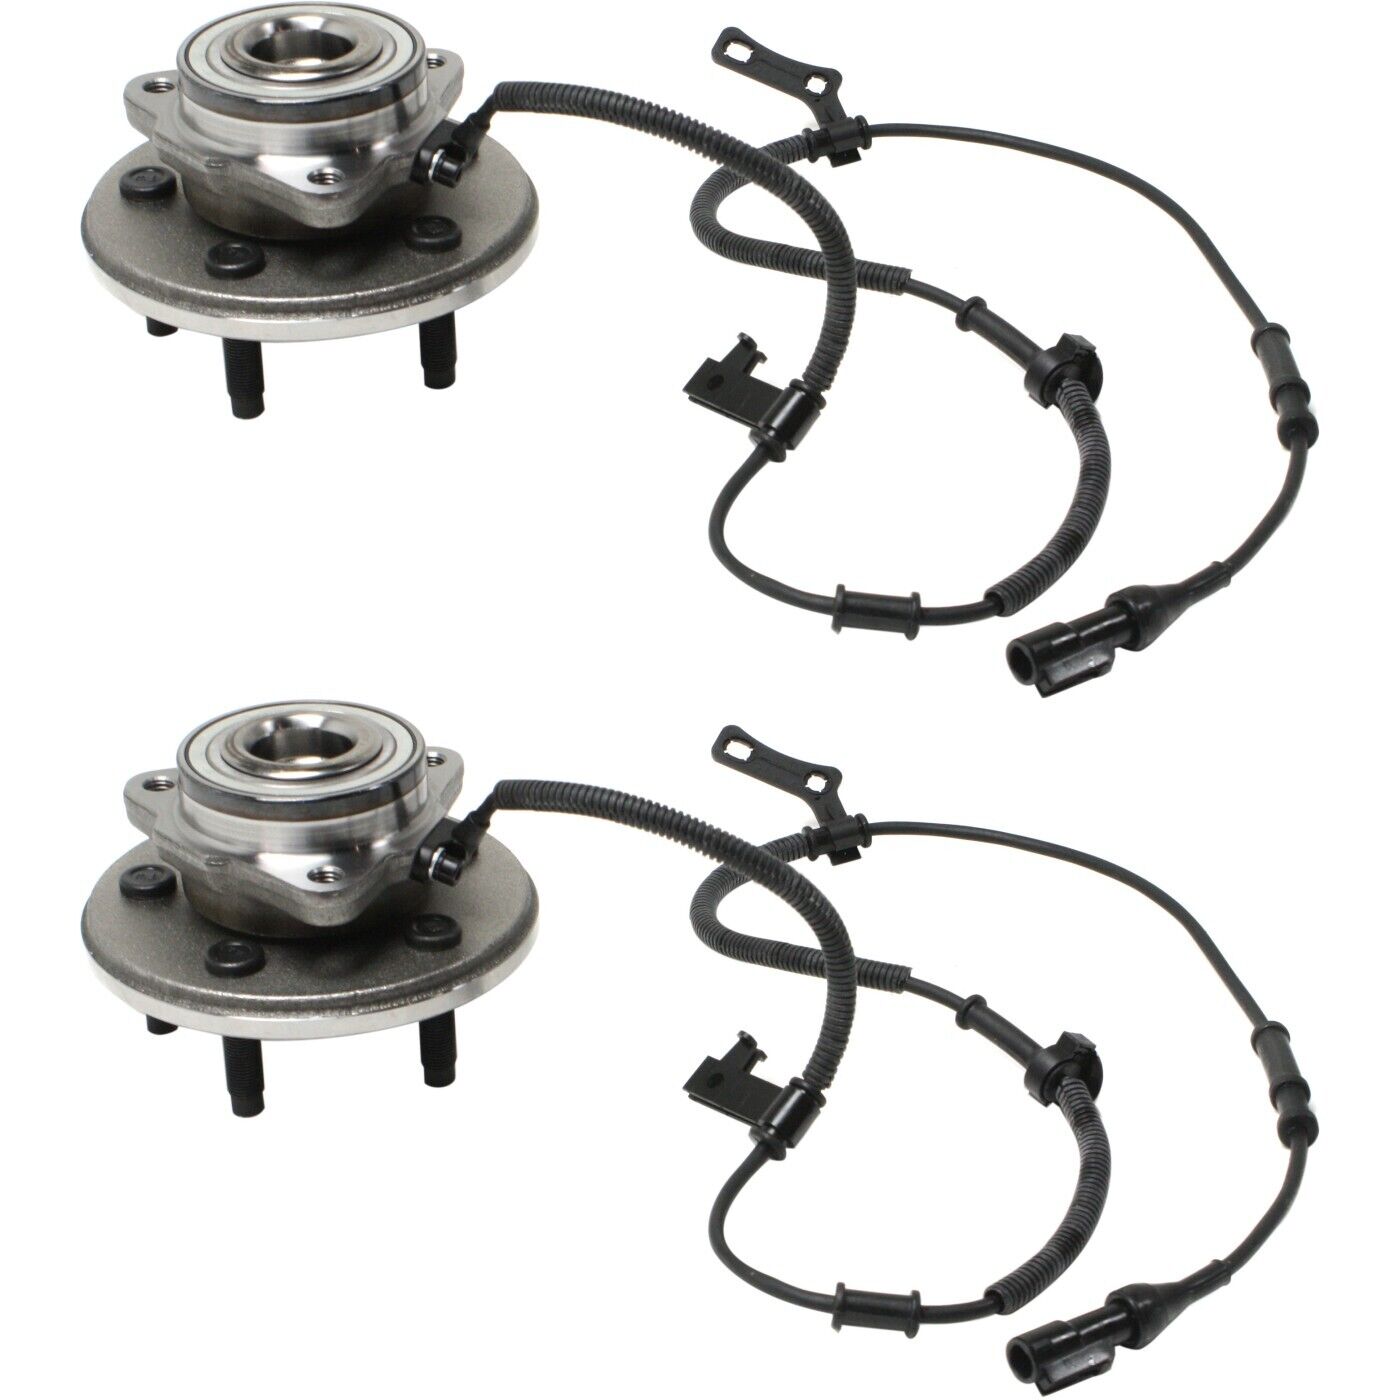 Front Wheel Hub Assembly Set For 2006-2010 Ford Explorer Mountaineer 4WD/RWD